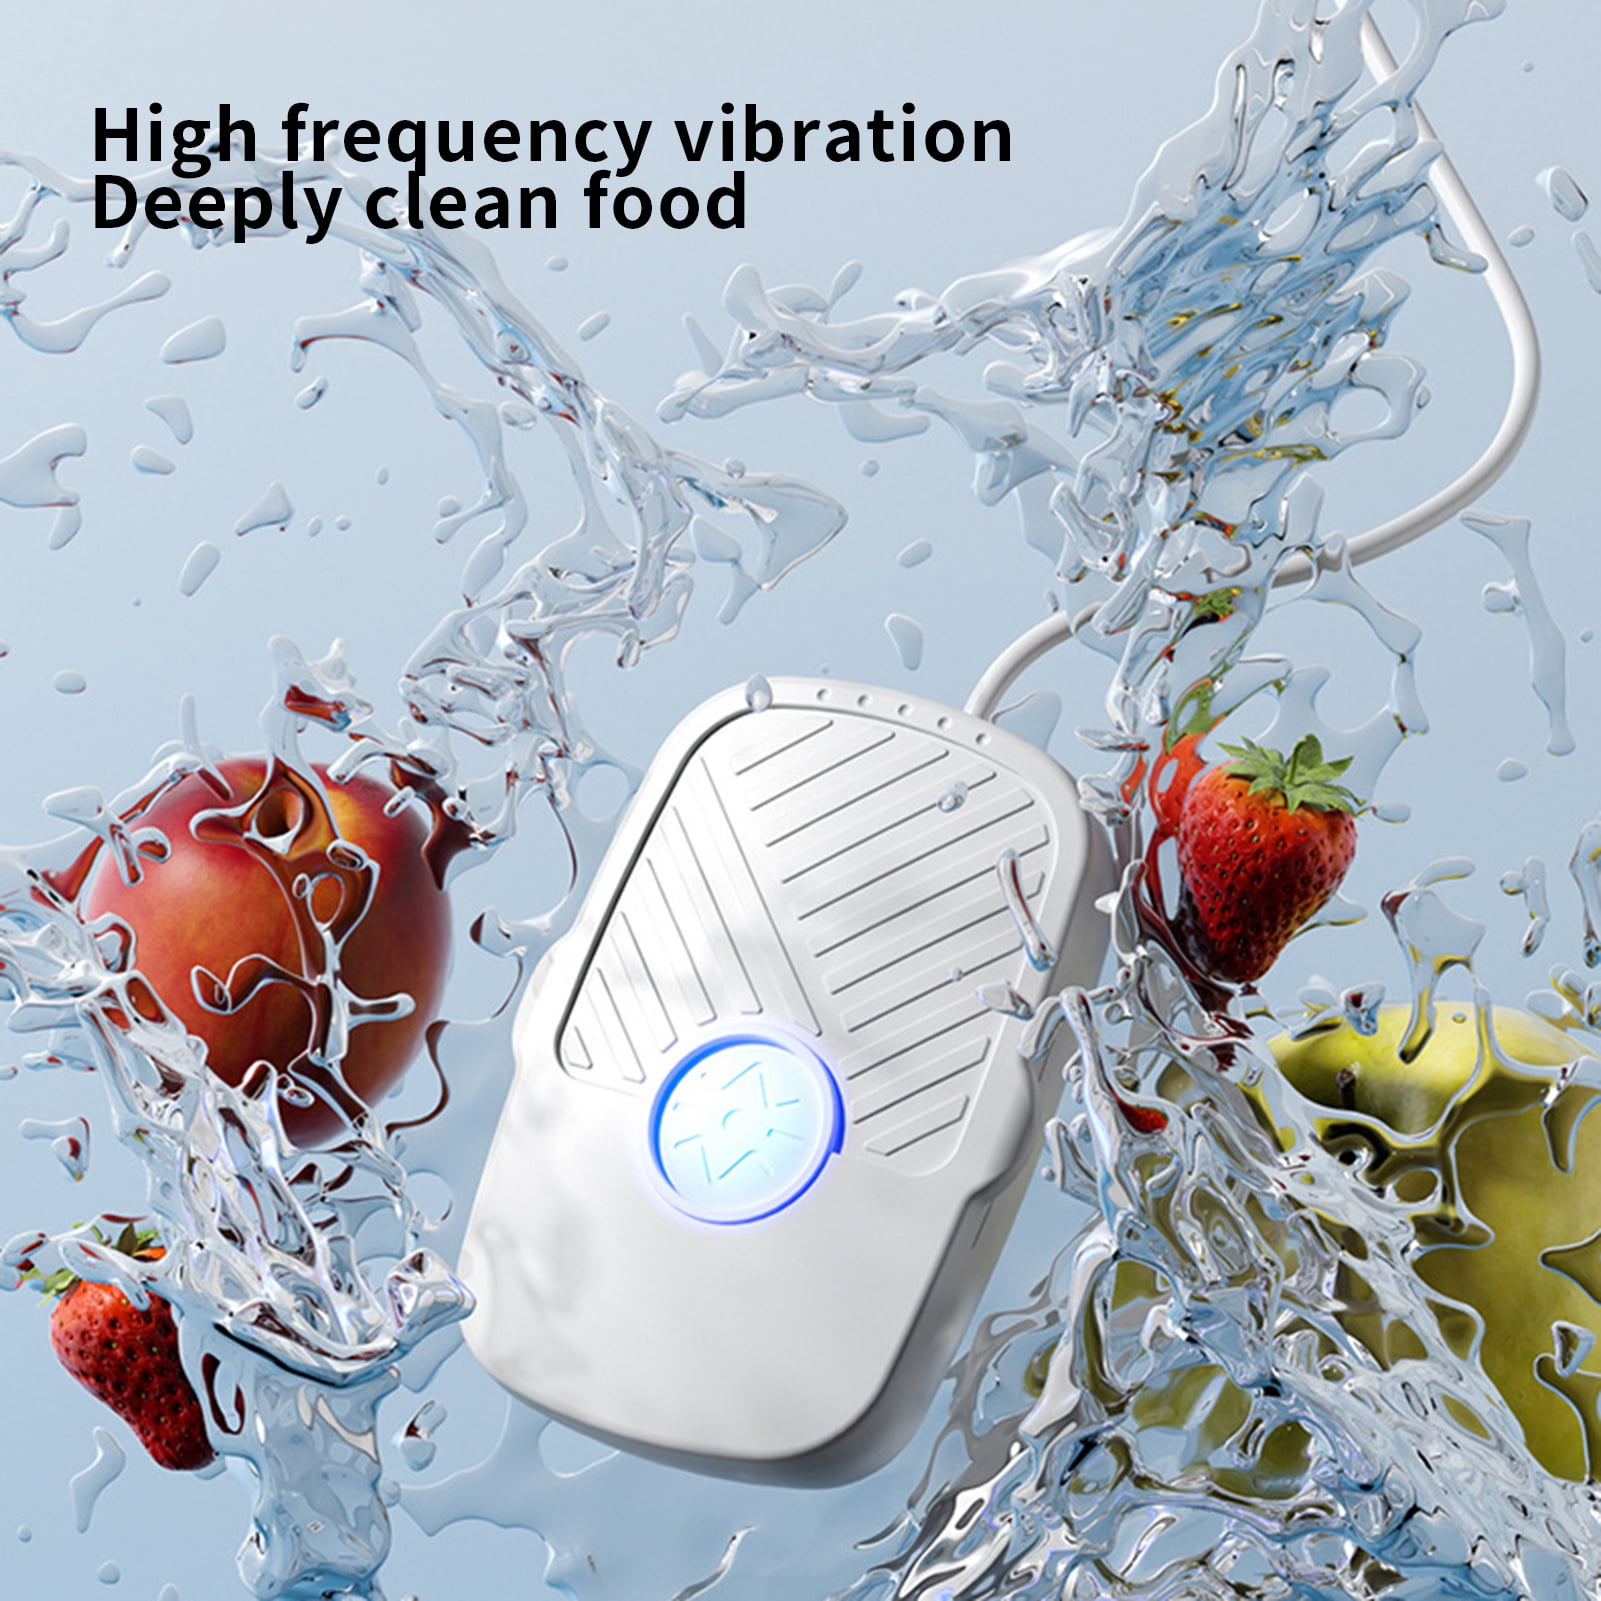 Hesroicy Fruit Washing Machine High-frequency Vibration Deep Cleaning Low  Voltage Safe UV Light Remove Residues Mini Size Apple Cherry Hotel Food  Food